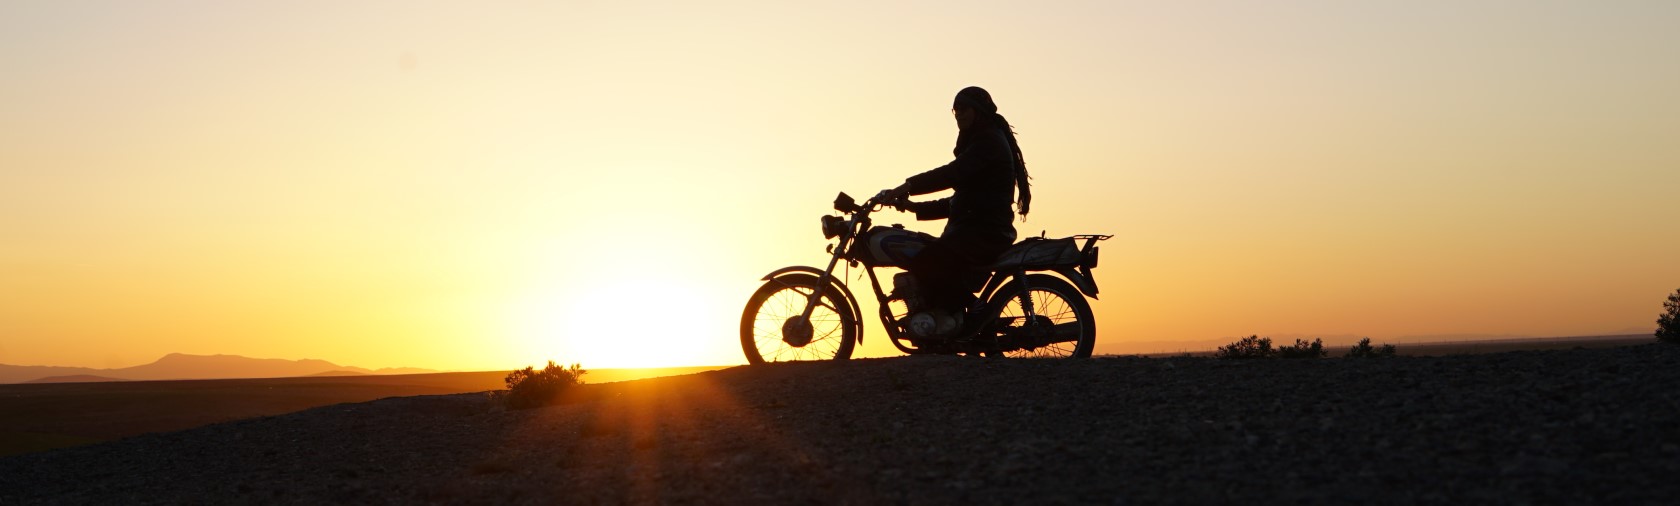 Silhouette of person on motorcycle at sunset, from Cutting Through Rocks